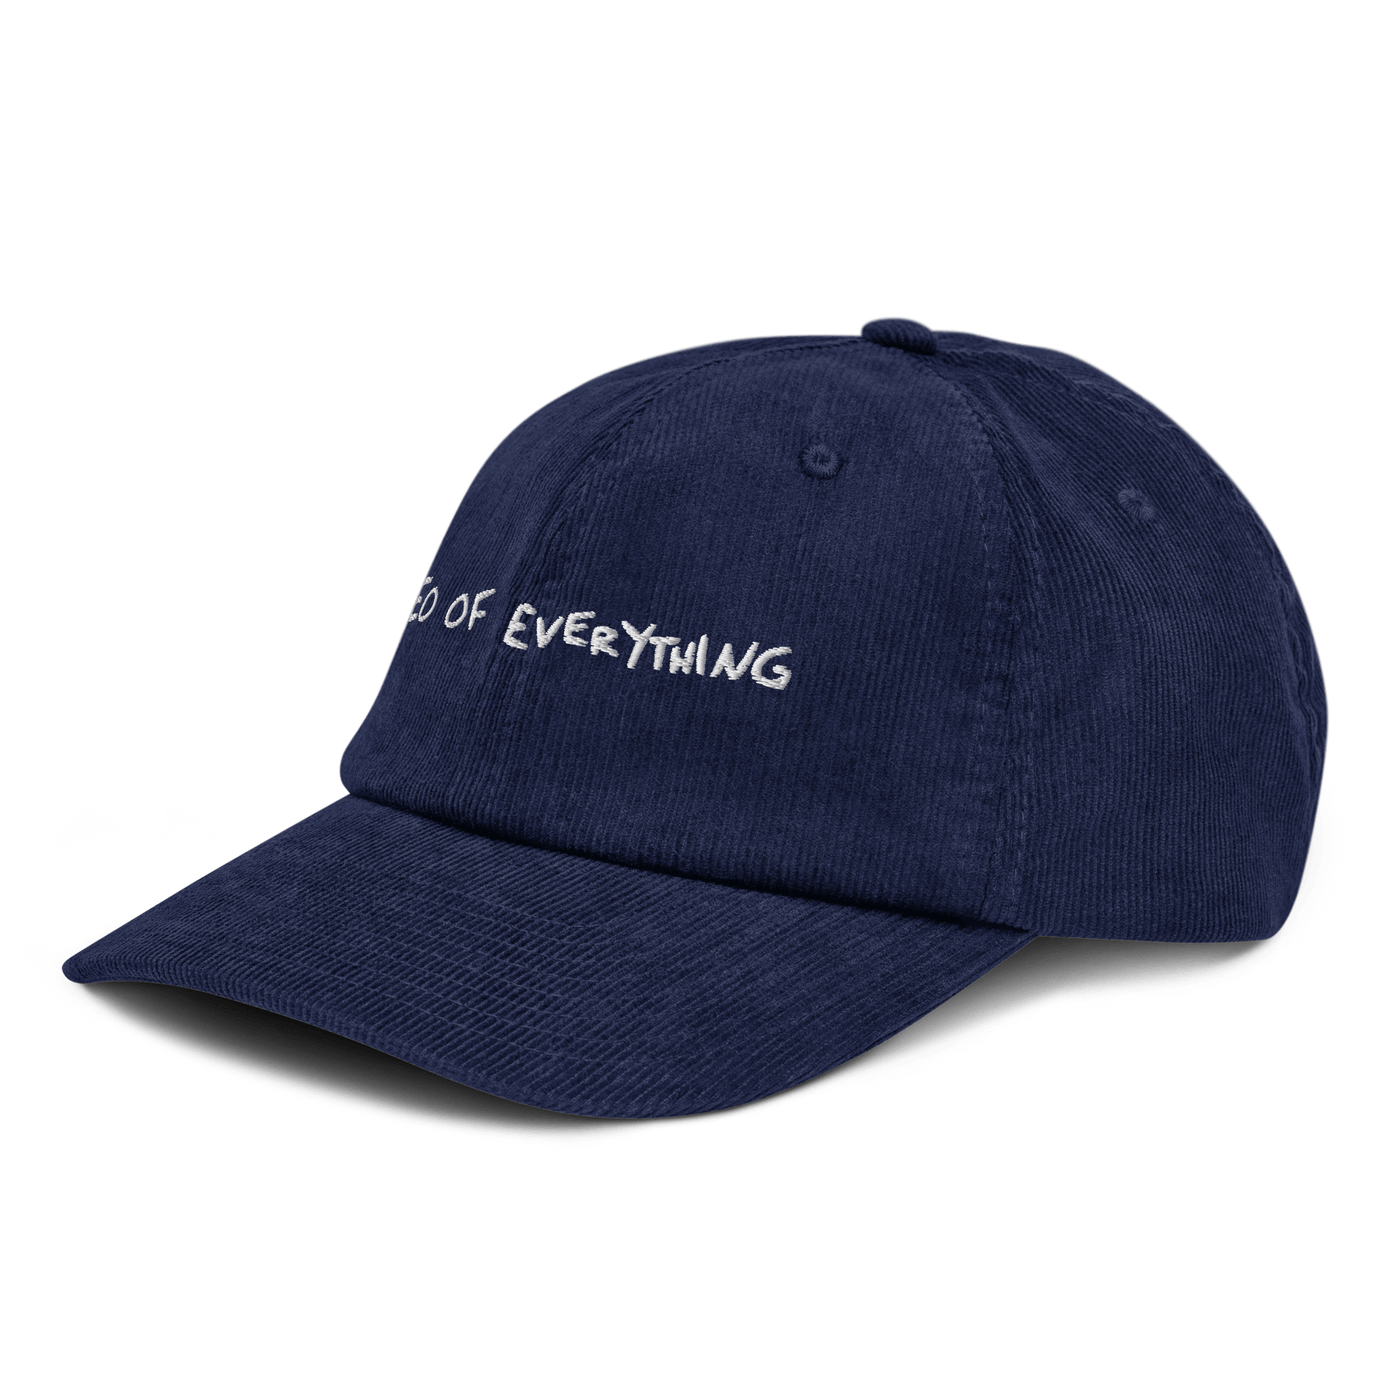 CEO of everything Corduroy hat - Oxford Navy - - Just Another Cap Store